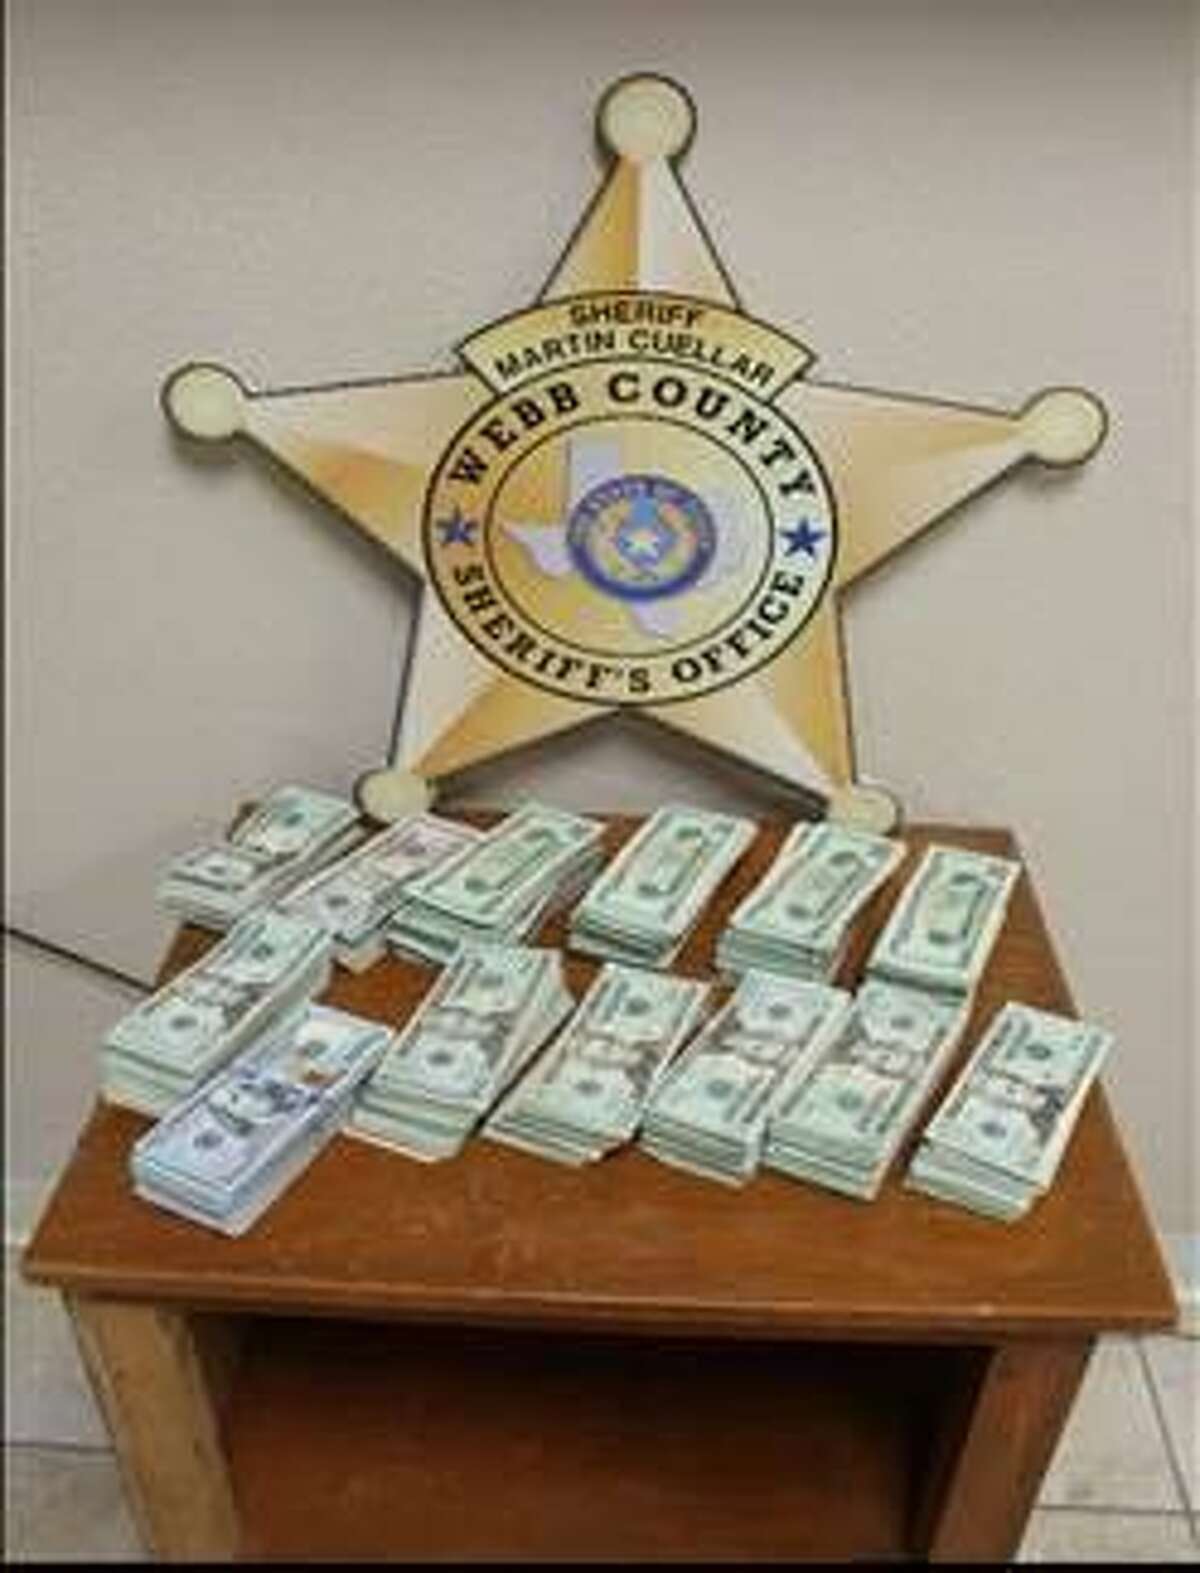 The Webb County Sheriff's Office seized more than $70,000 from a Dodge Dart.